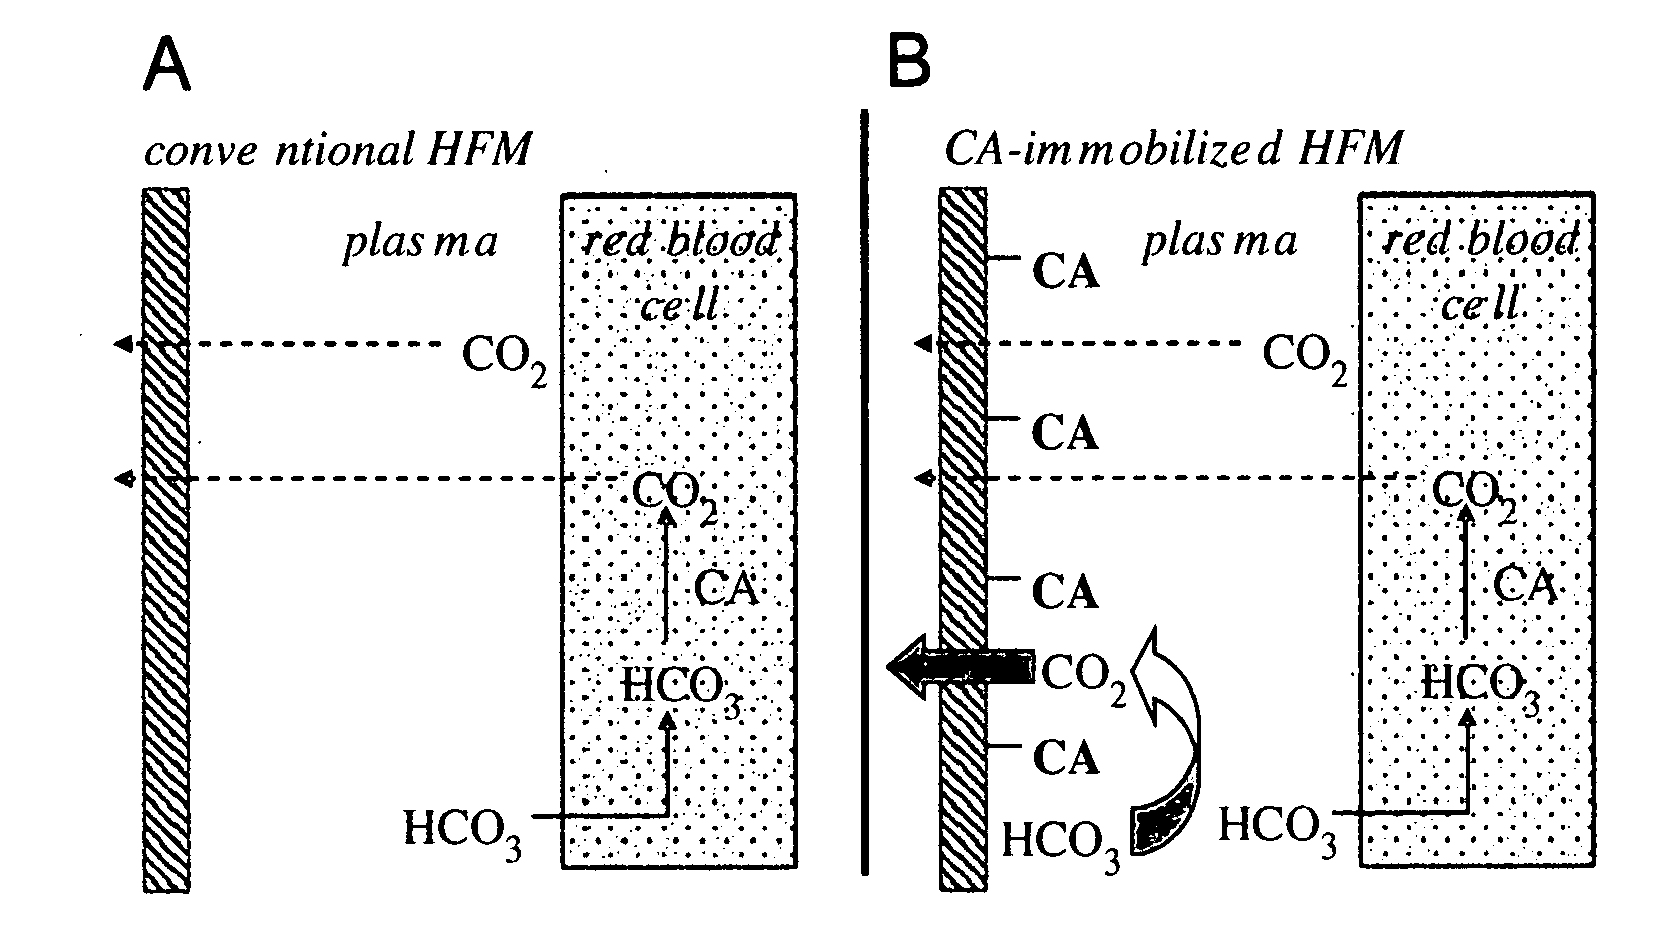 Devices, systems and methods for reducing the concentration of a chemical entity in fluids